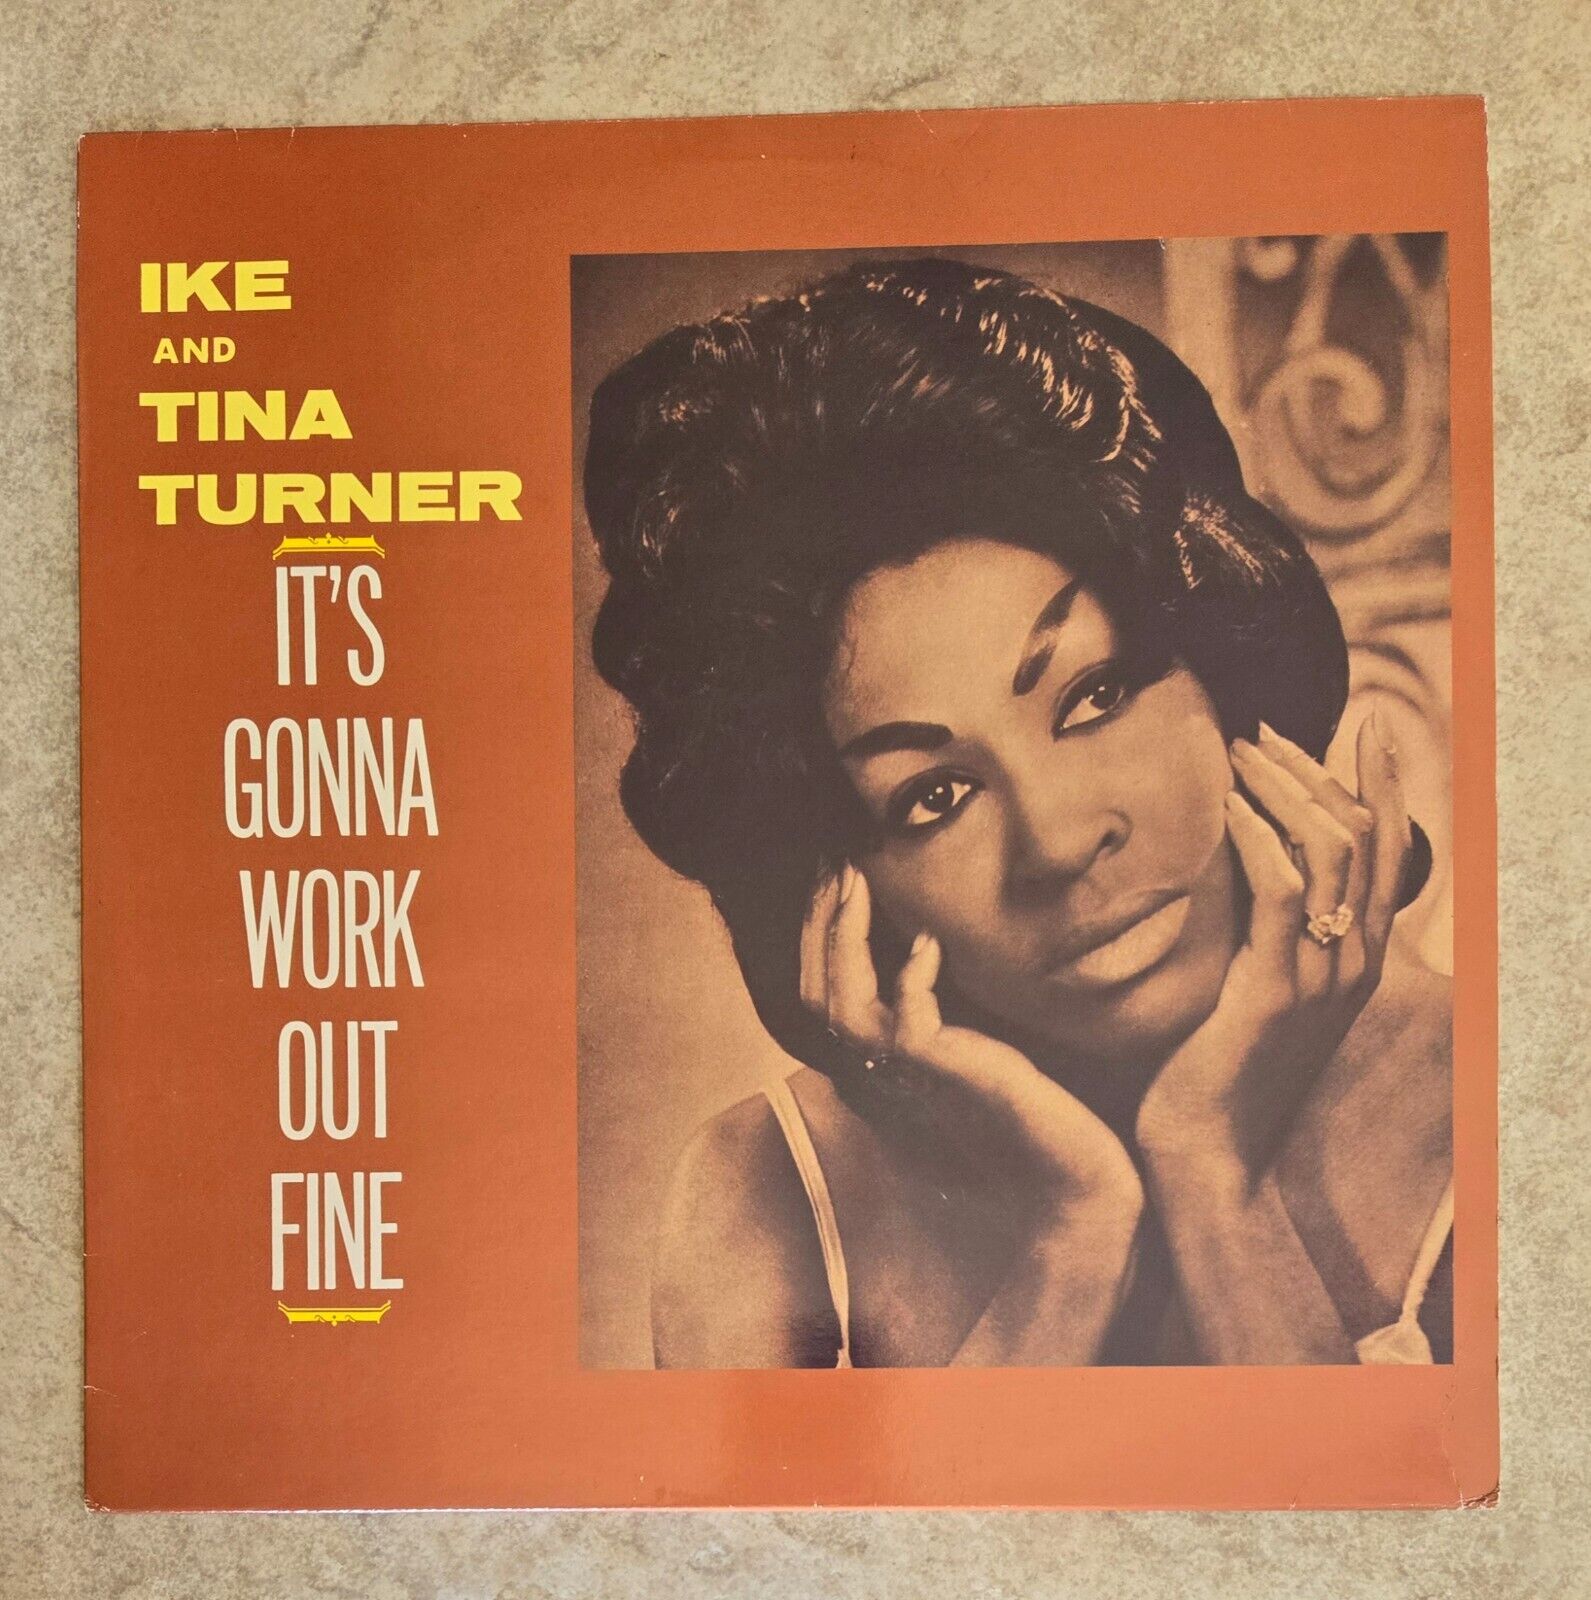 Ike & Tina Turner It's Gonna Work Out Fine Vinyl 12" Album Rare Germany Reissue